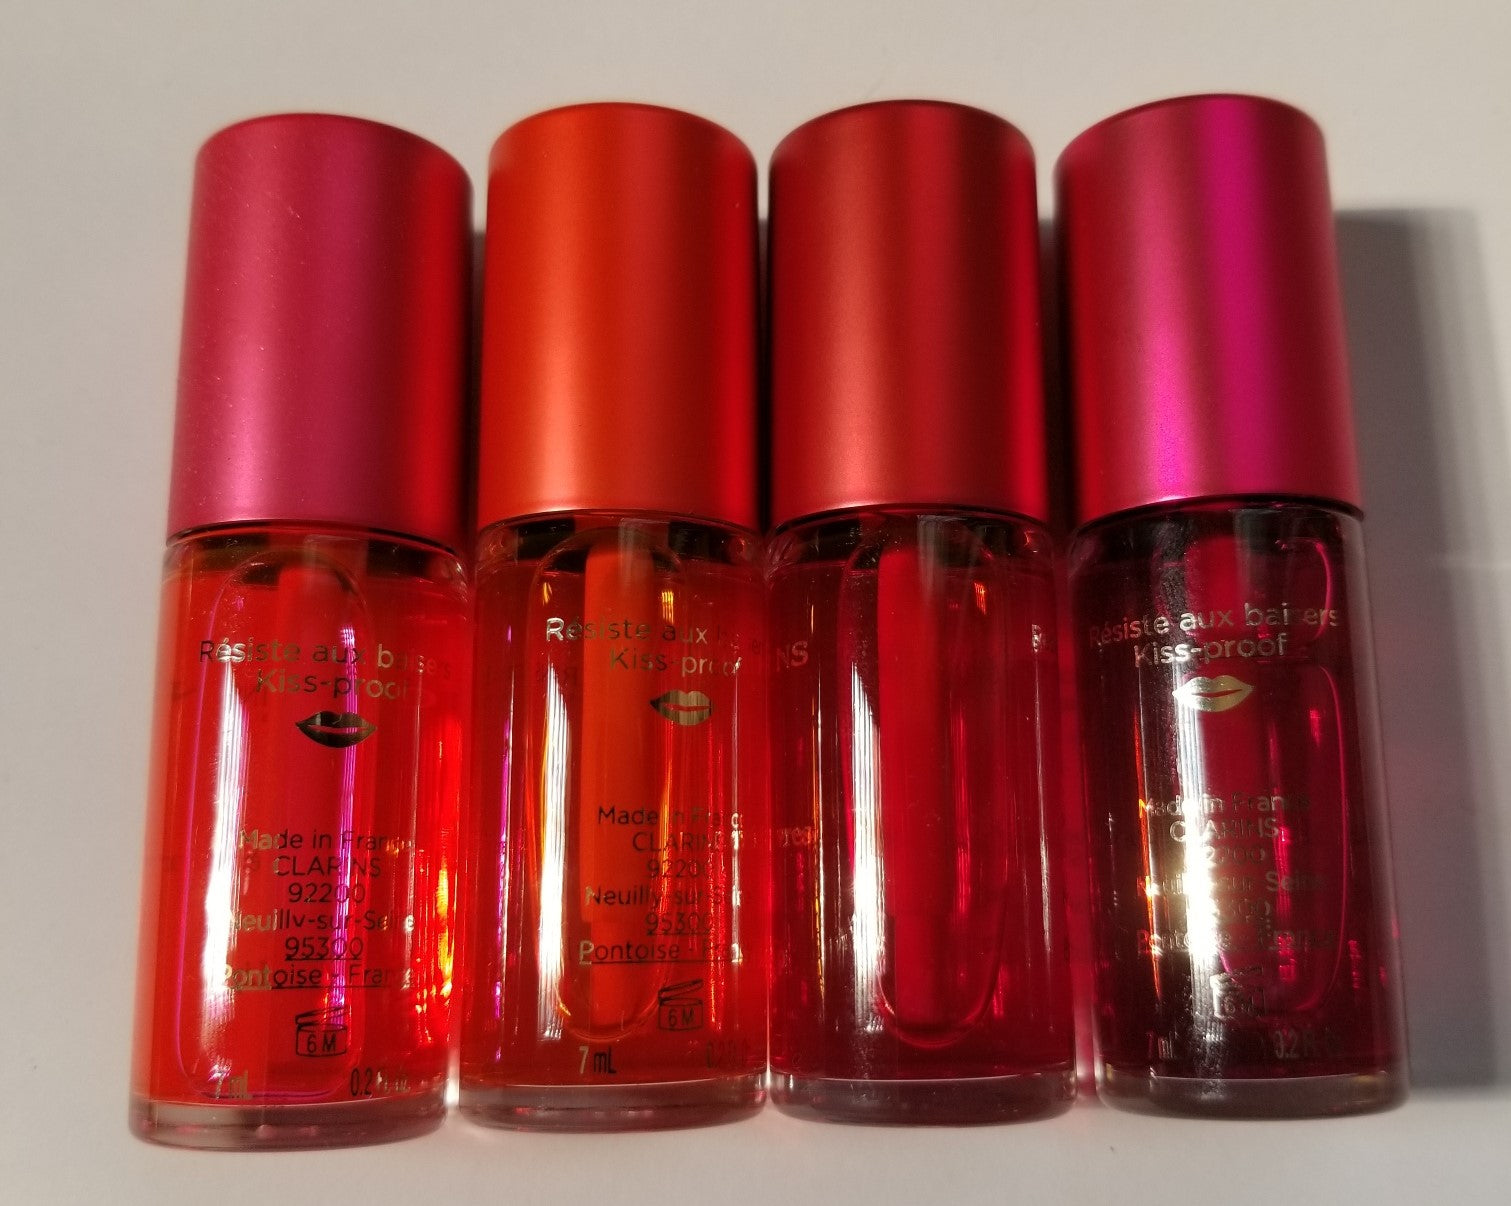 Review, Swatches, Photos, Makeup Trends 2018, 2019, 2020: Best Summer Lip Stains, Long-Lasting Lip Products, Clarins, Water Lip Stain